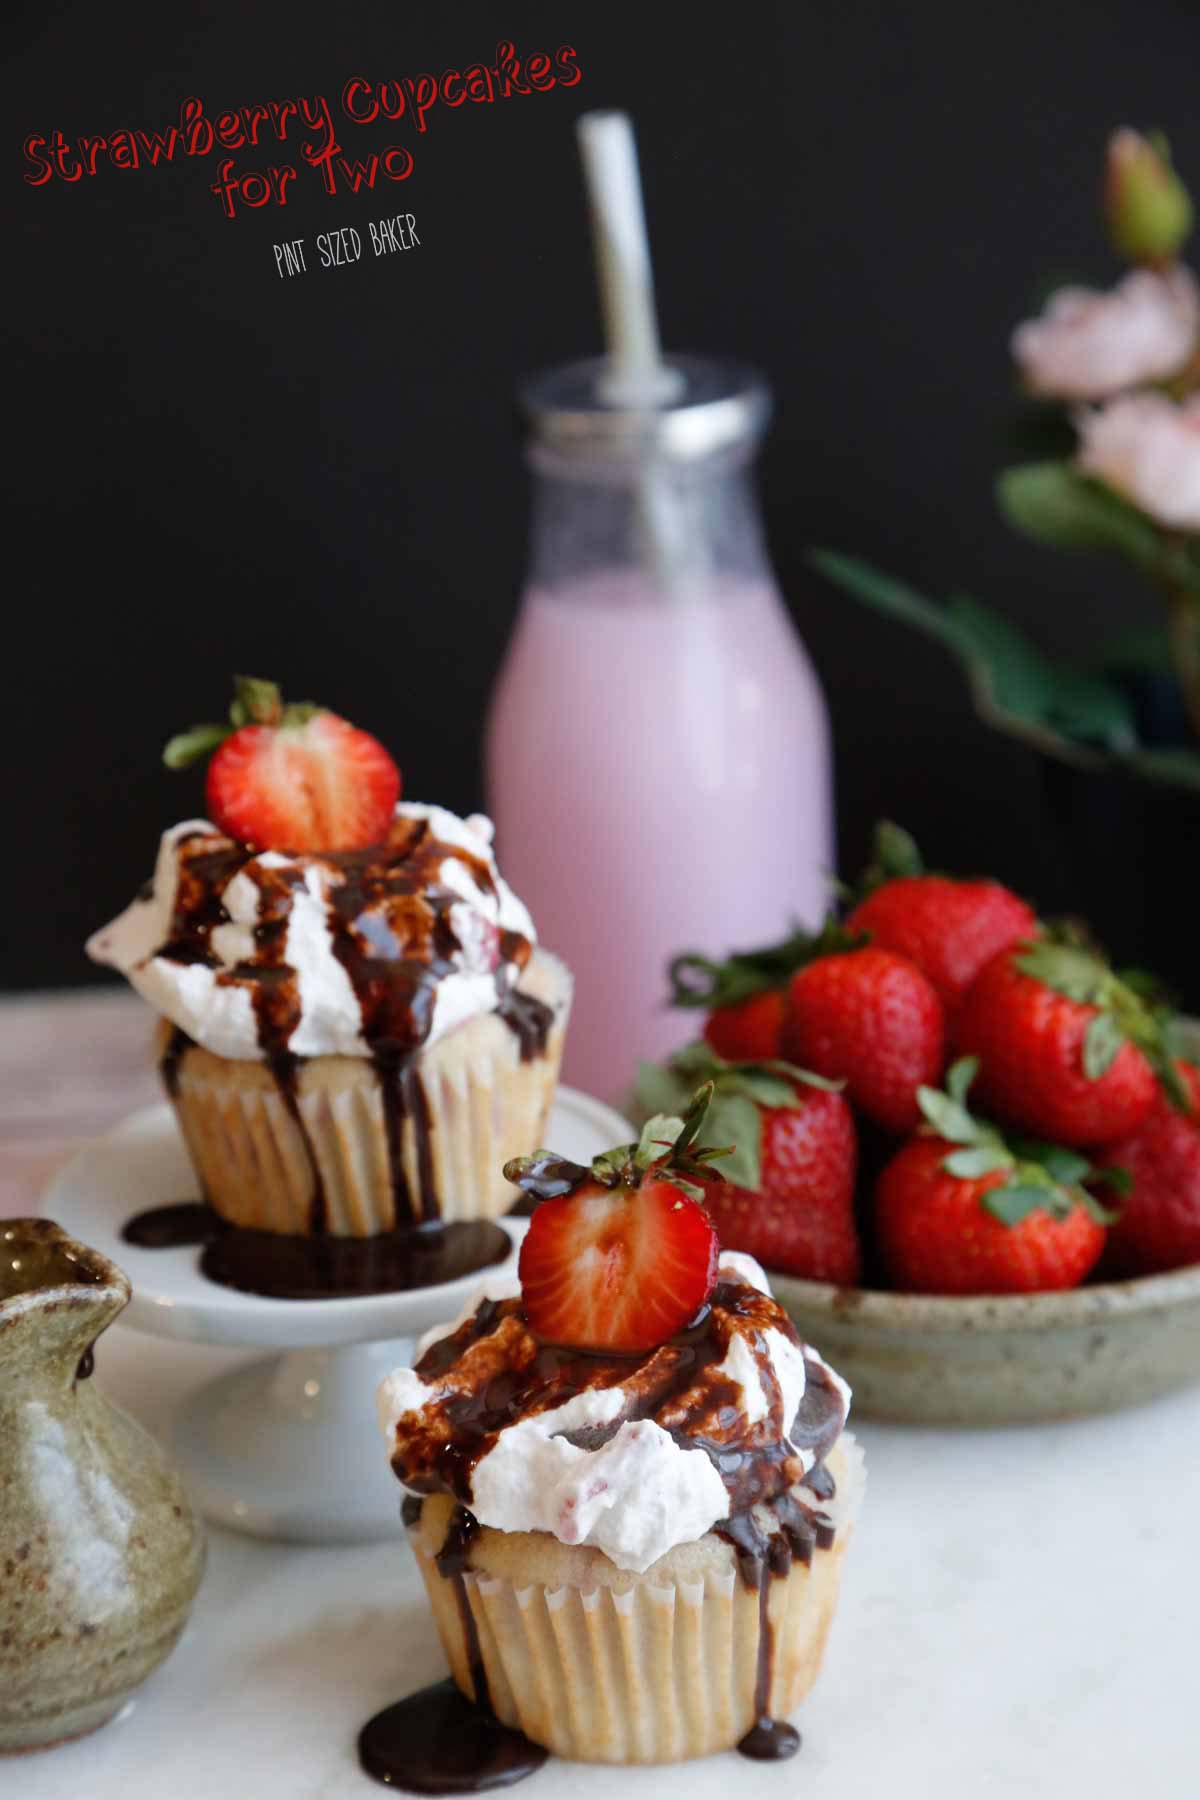 Strawberry Cupcakes for Two